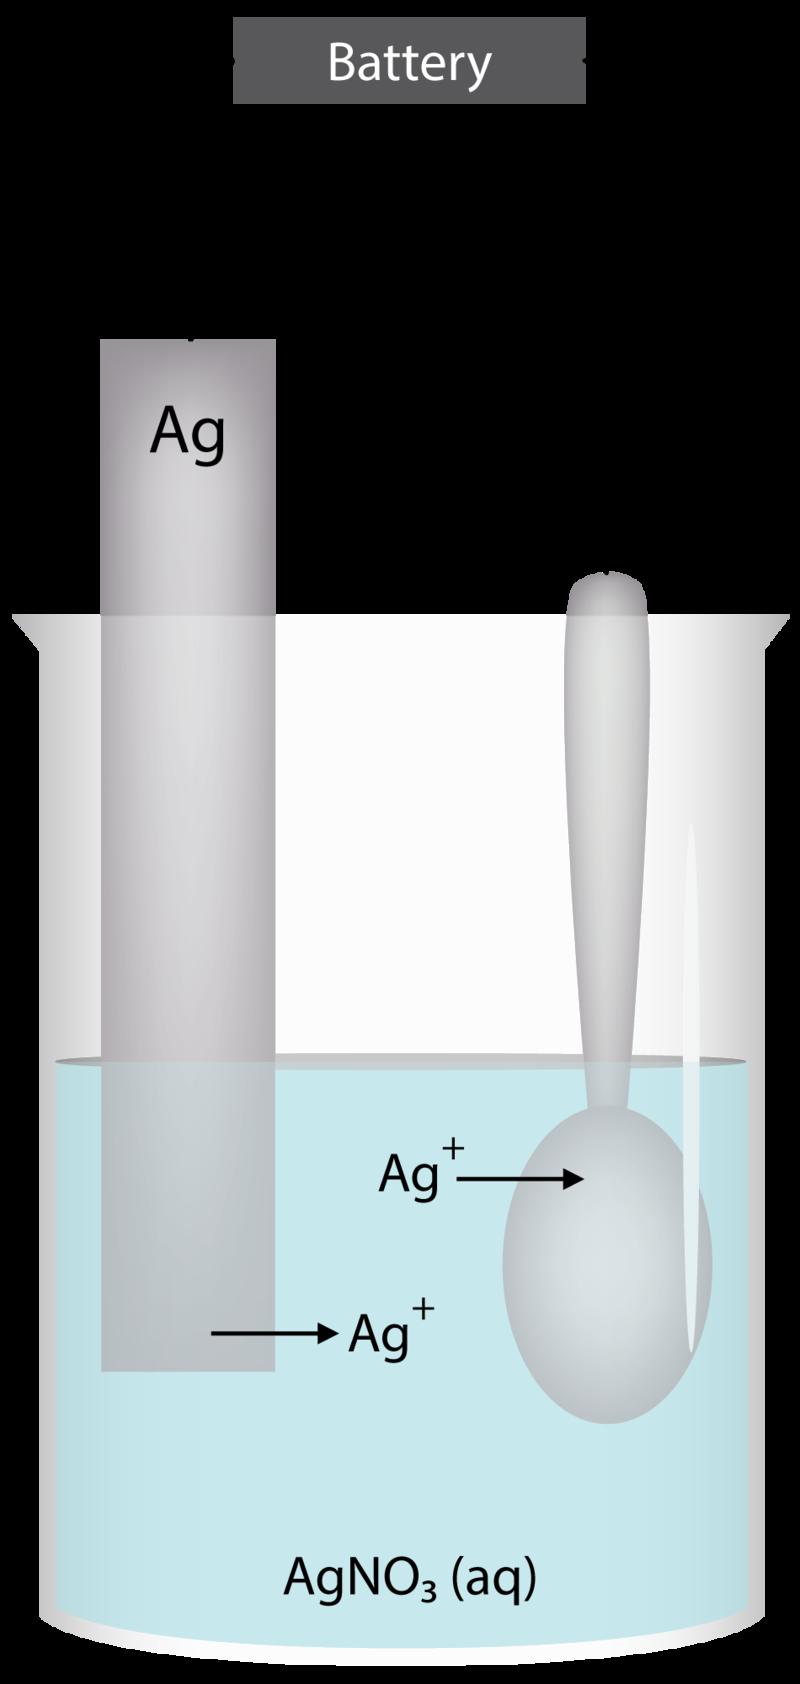 www.ck12.org Chapter 1. Electrochemistry FIGURE 1.10 An electrolytic cell used in the electroplating of silver onto a metal spoon. A silver strip is the anode, while the spoon itself is the cathode.